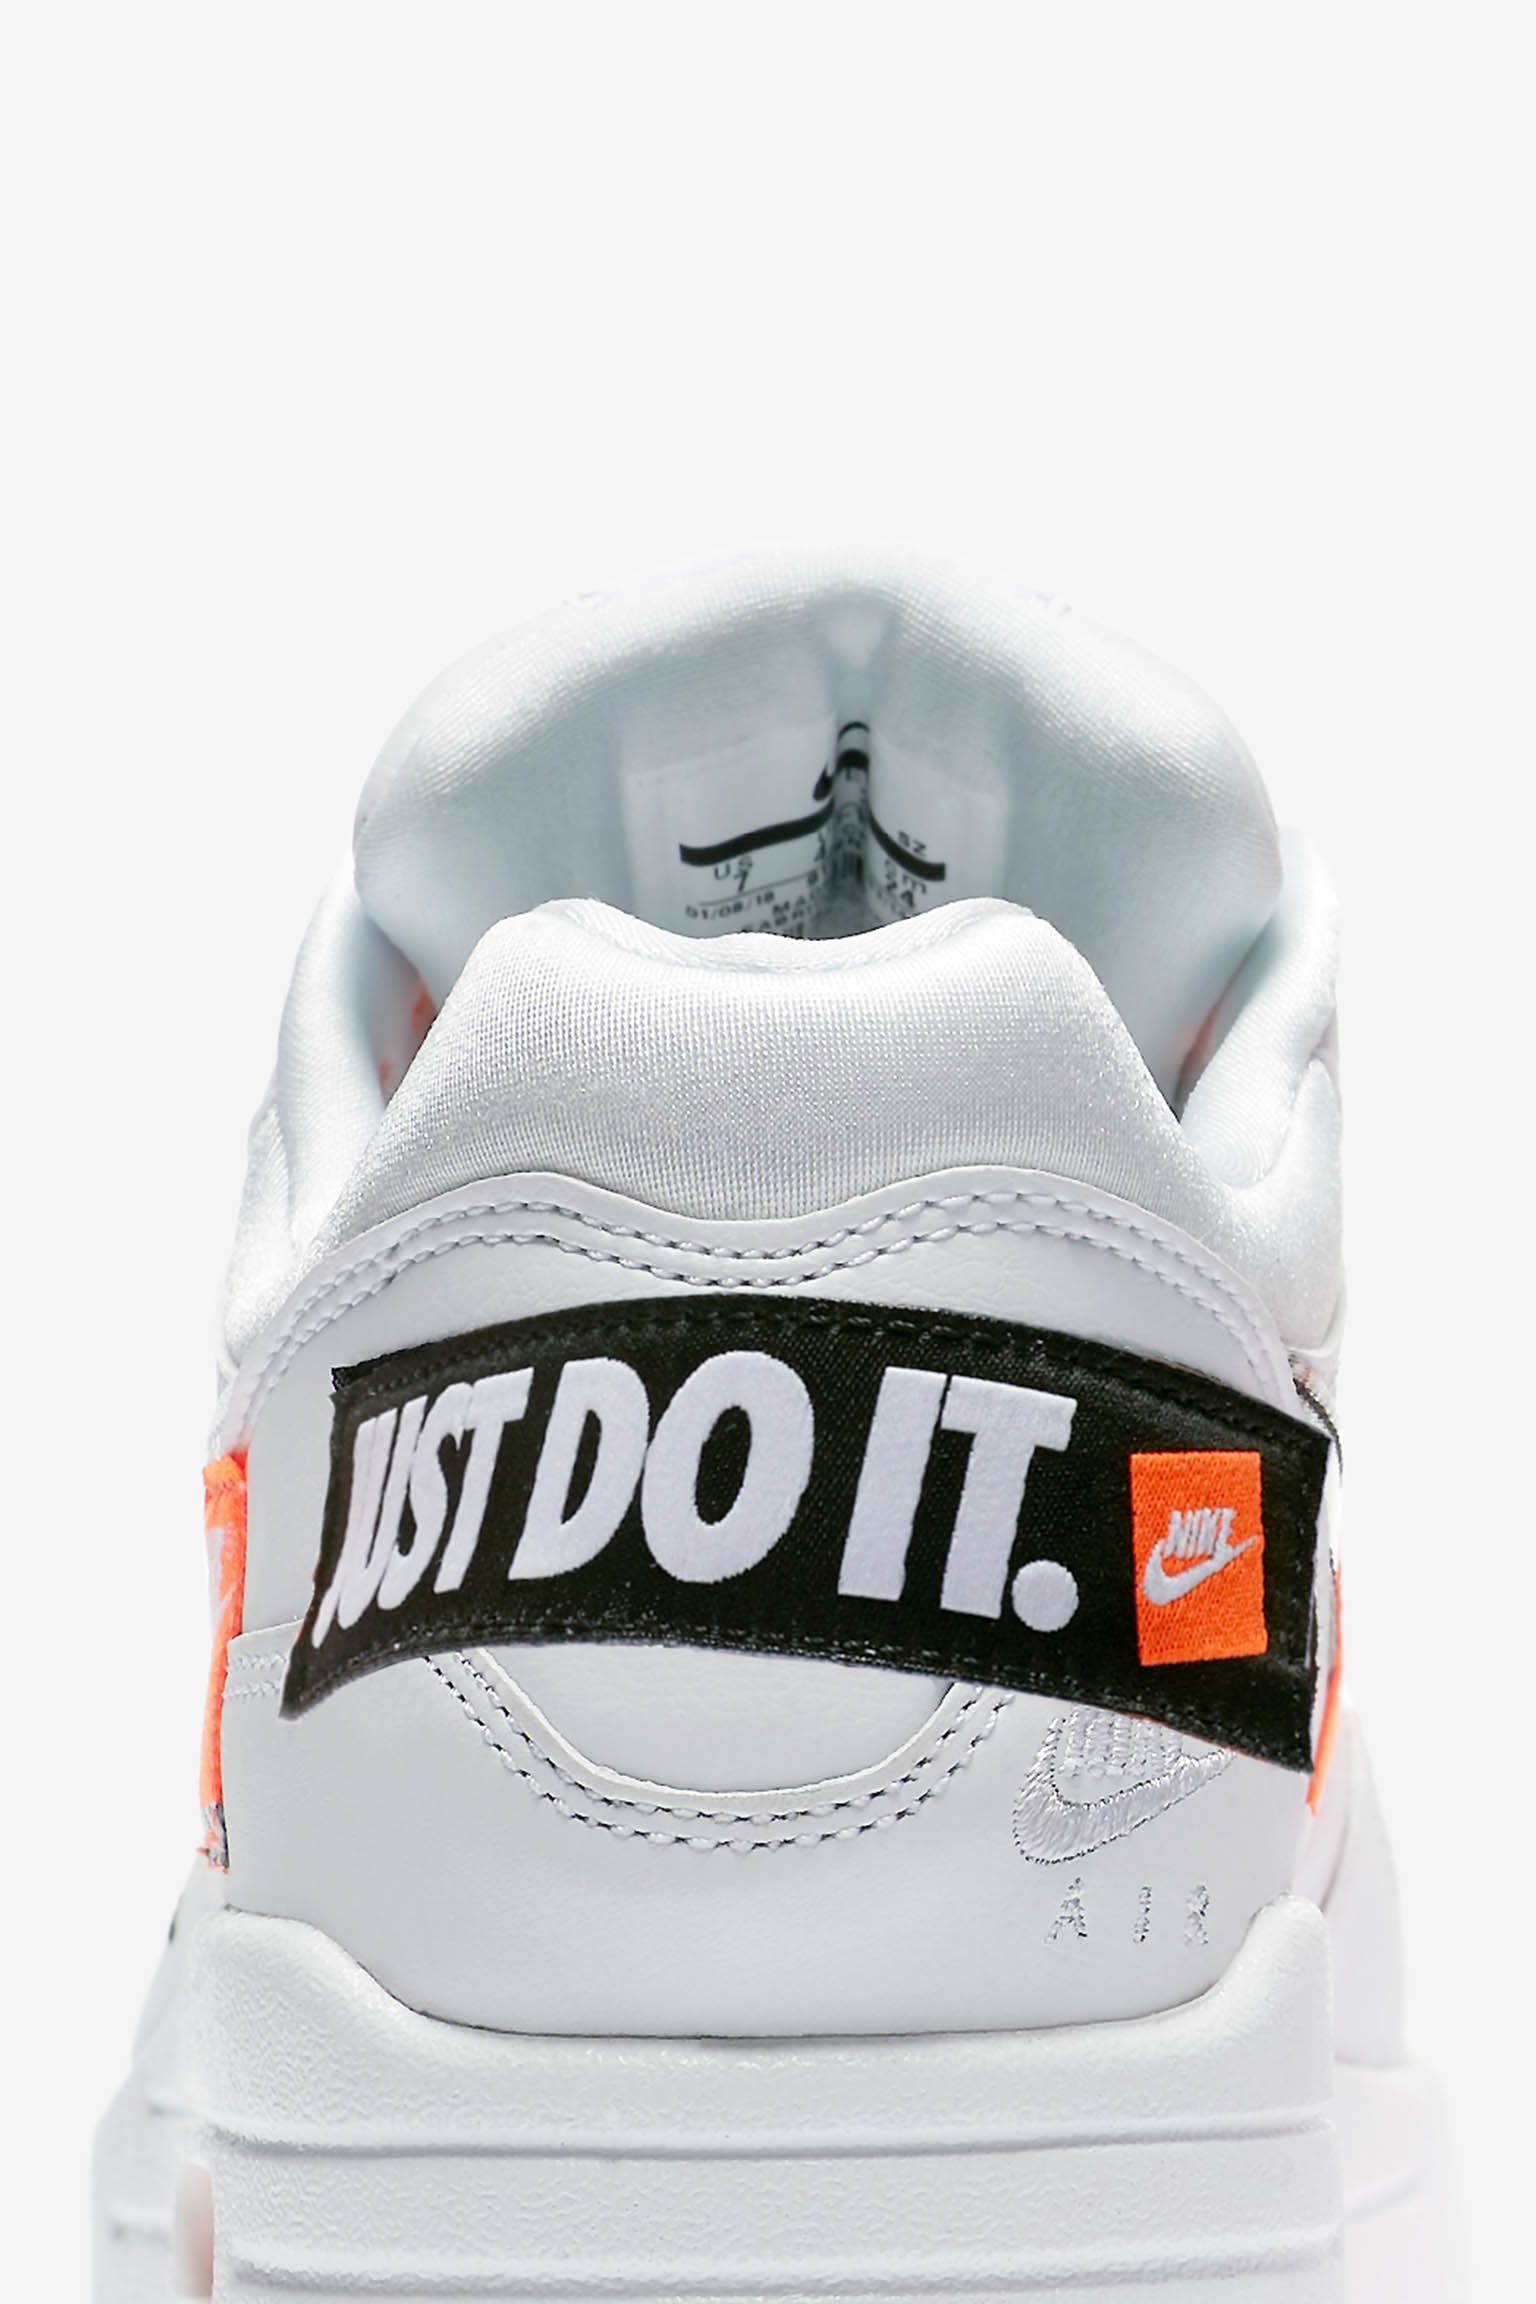 nike just do it training shoes